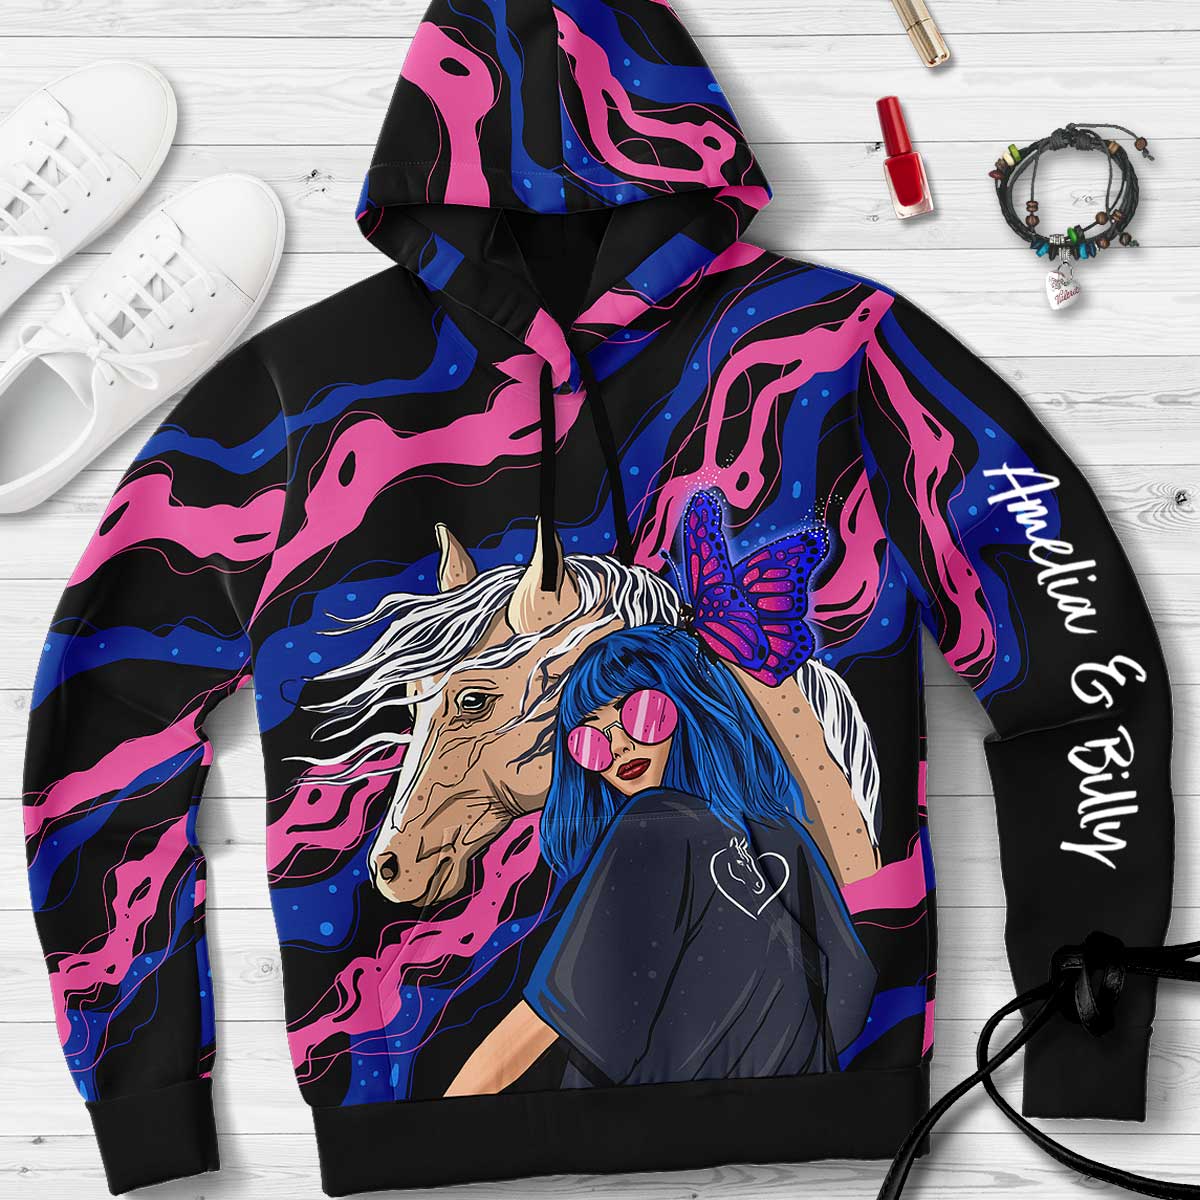 Not Your Typical Girl - Horse Girl Premium Hoodie